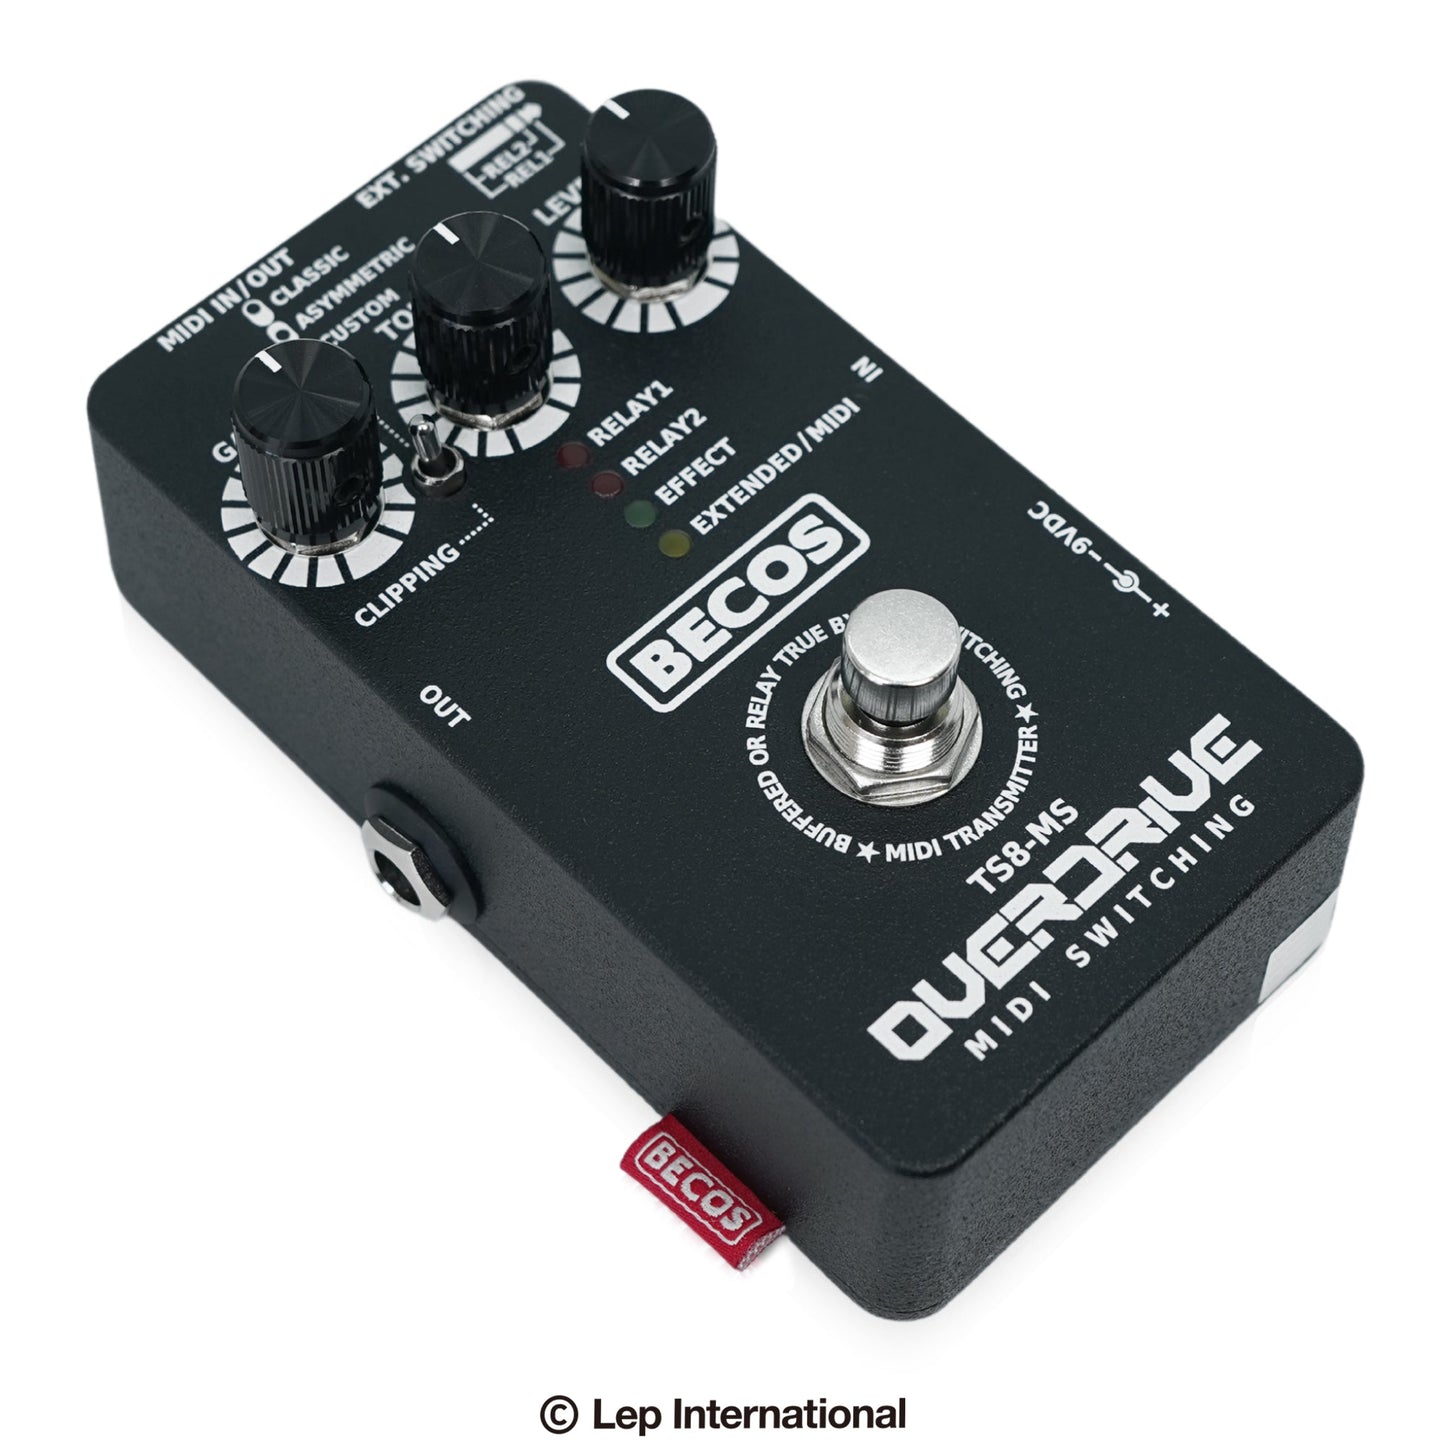 BECOS/Overdrive / MIDI Amp Channel Switcher